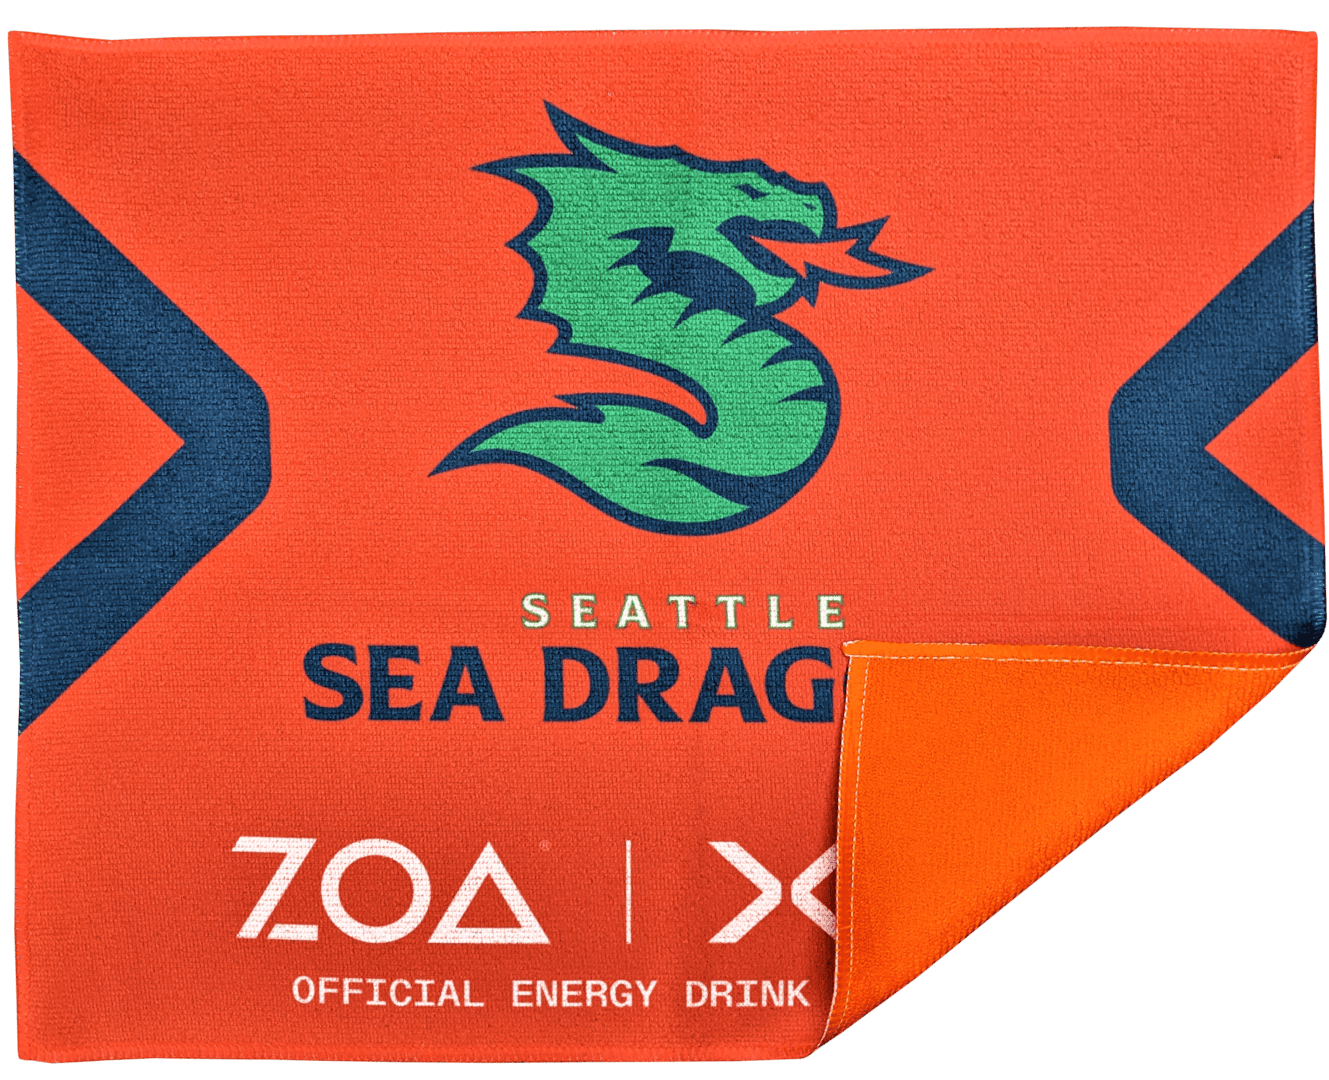 Seattle sea dragon text printed on a cloth